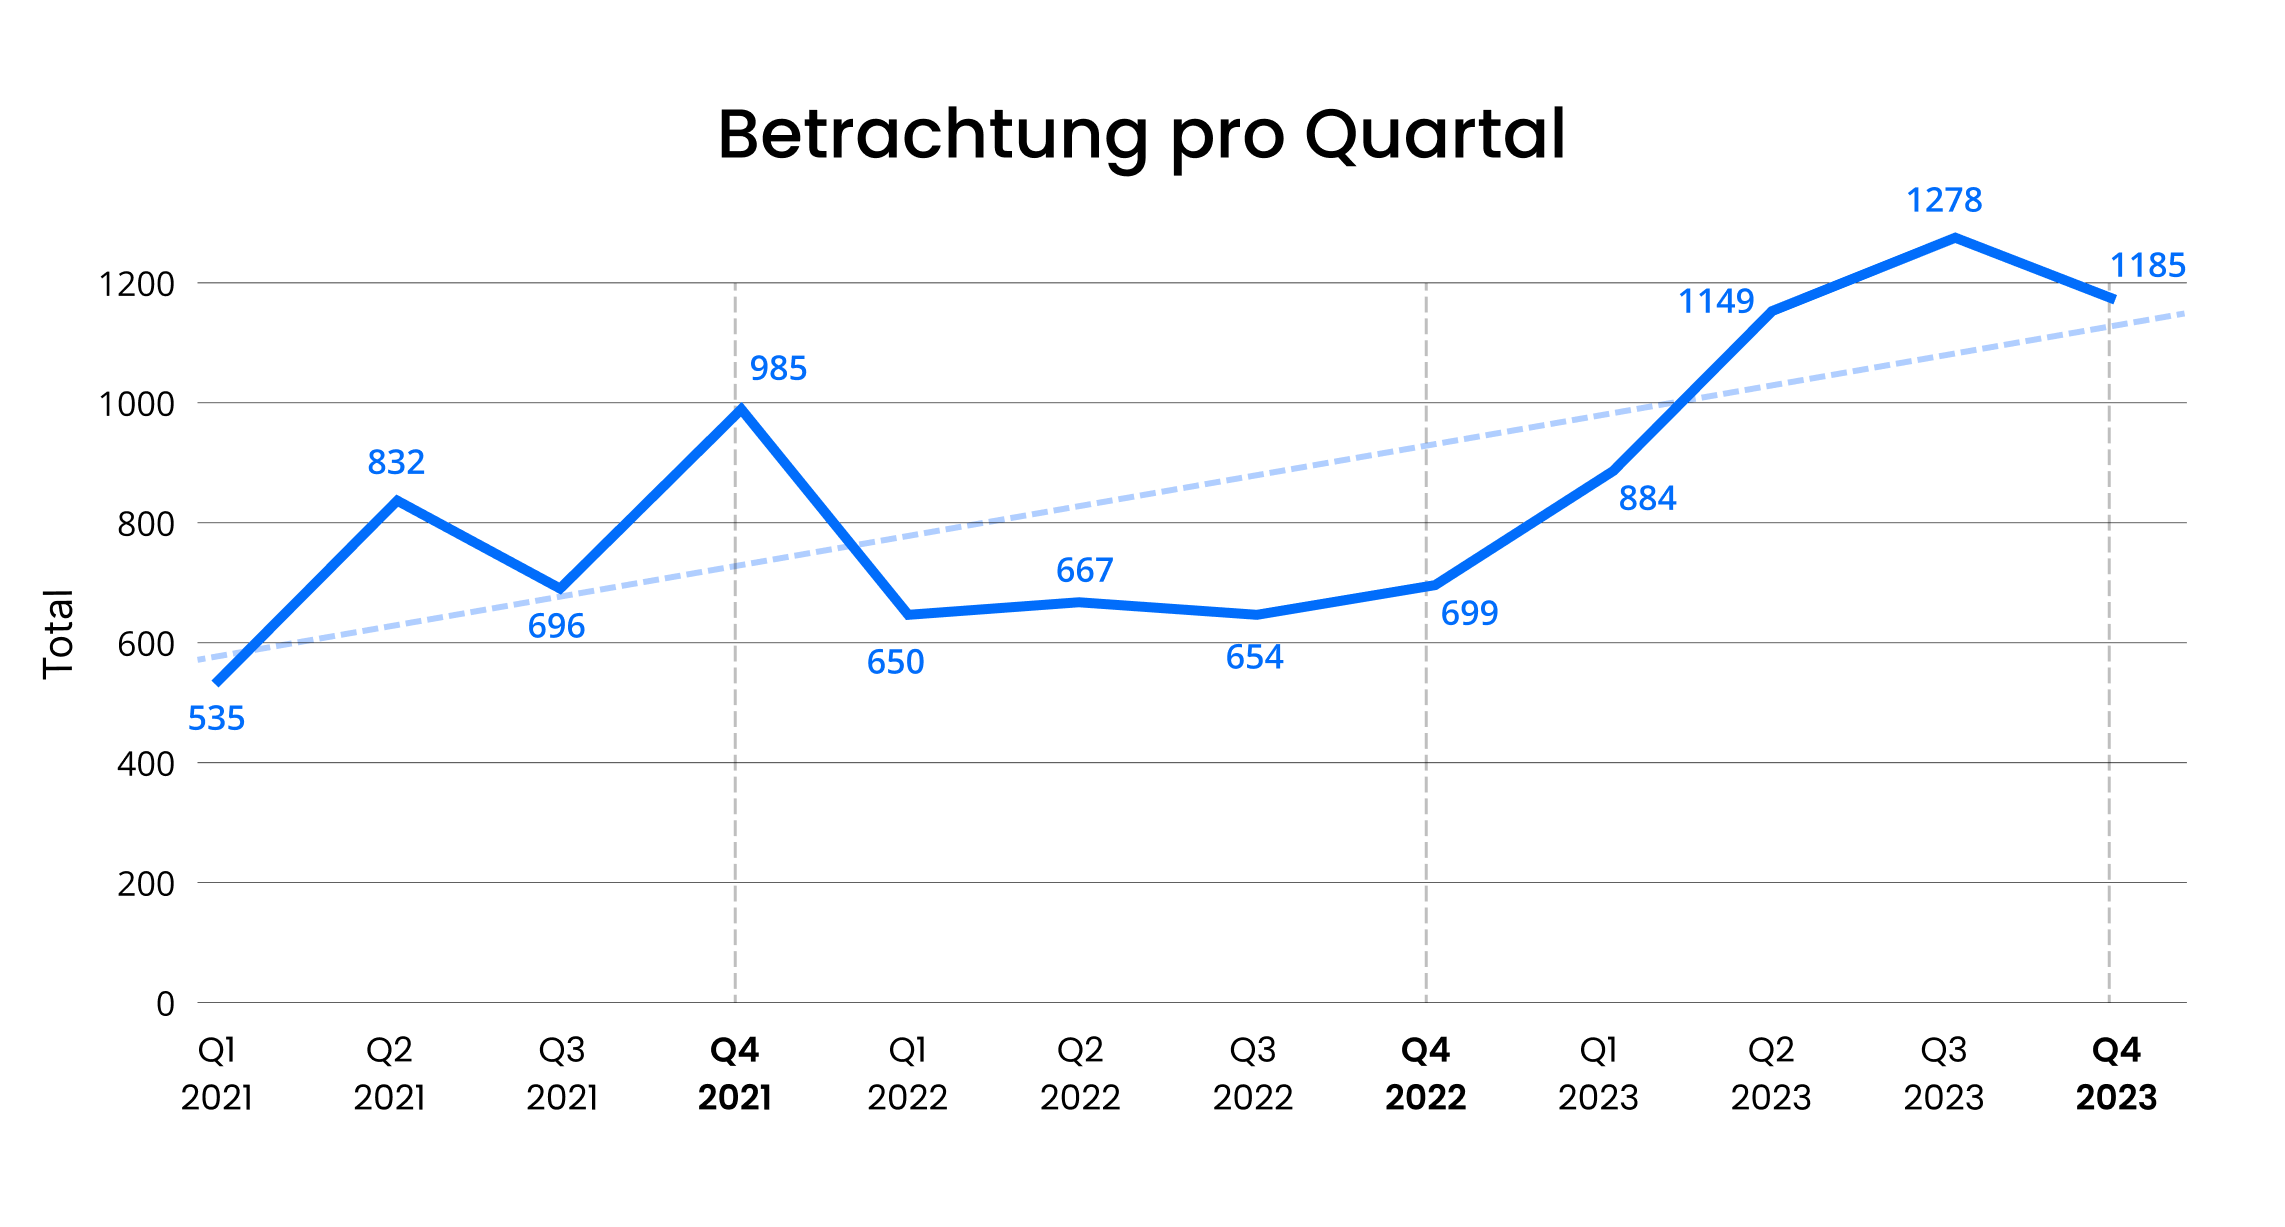 Over Time by Quarter Q4